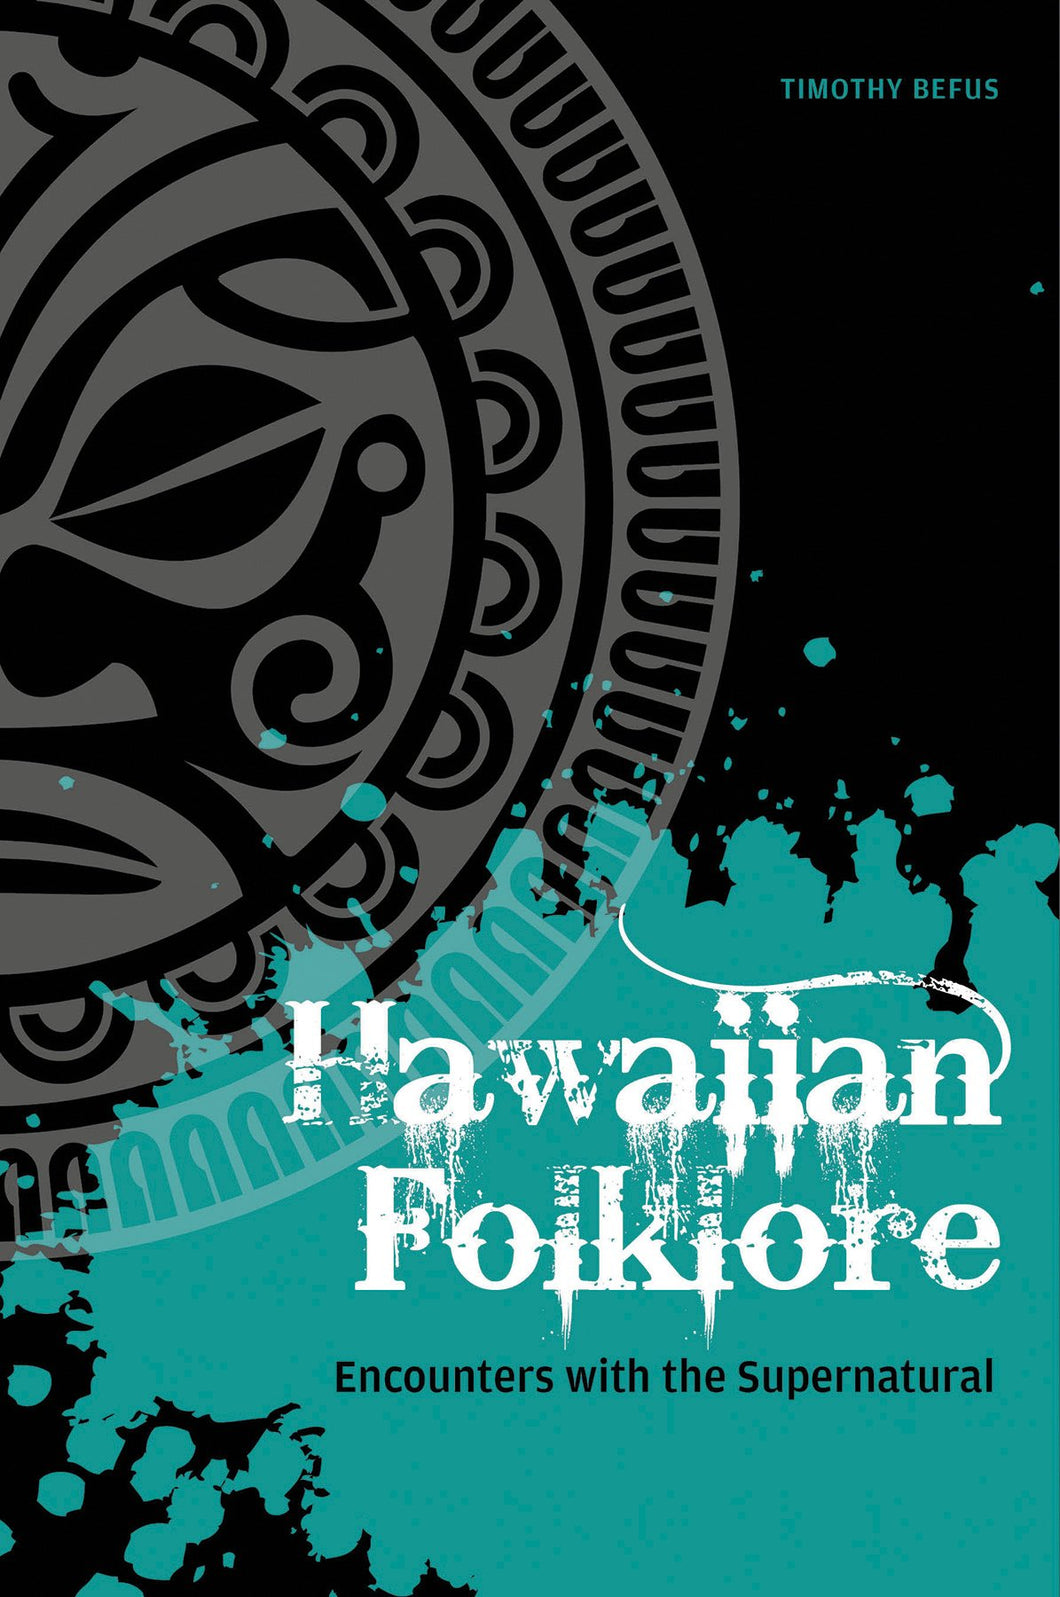 Hawaiian Folklore: Encounters with the Supernatural: Timothy Befus: 9780764349447: